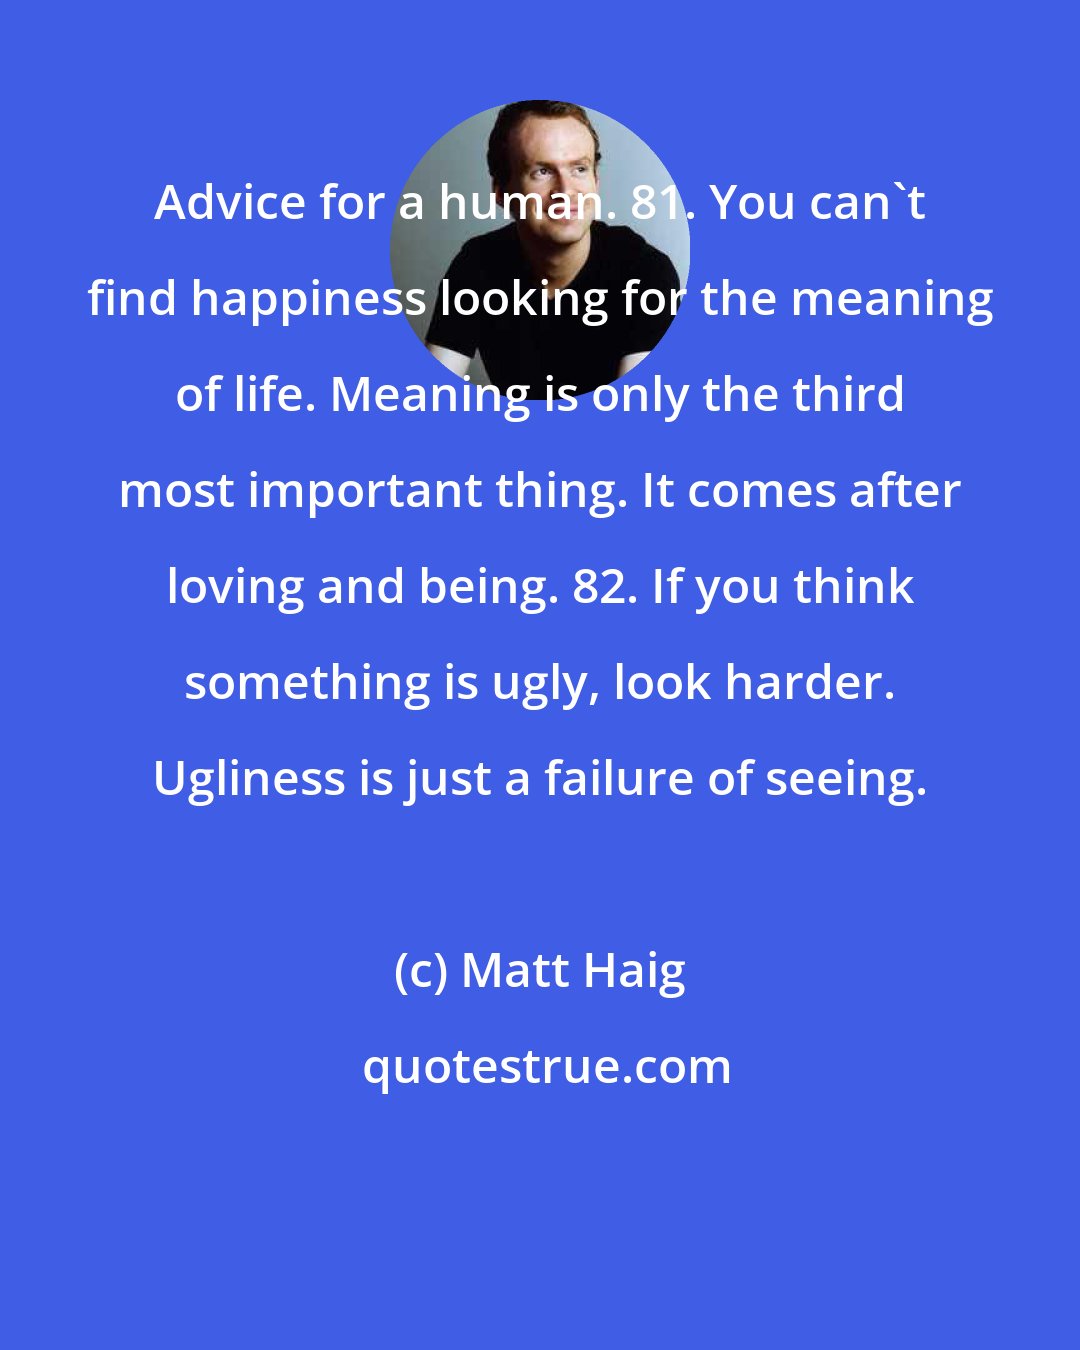 Matt Haig: Advice for a human. 81. You can't find happiness looking for the meaning of life. Meaning is only the third most important thing. It comes after loving and being. 82. If you think something is ugly, look harder. Ugliness is just a failure of seeing.